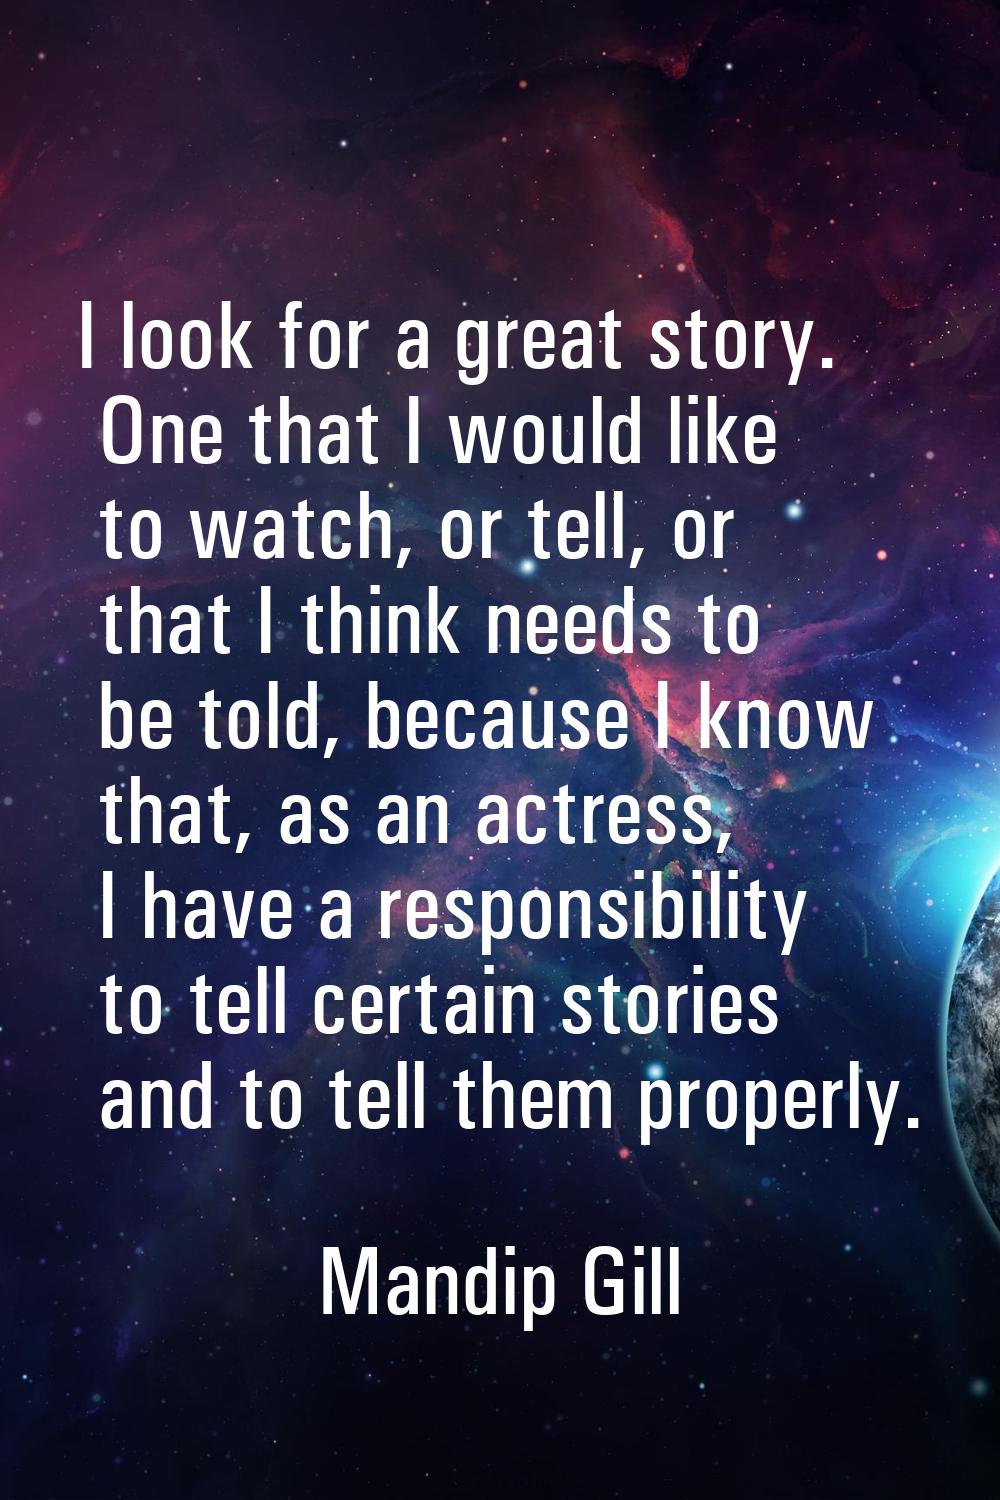 I look for a great story. One that I would like to watch, or tell, or that I think needs to be told